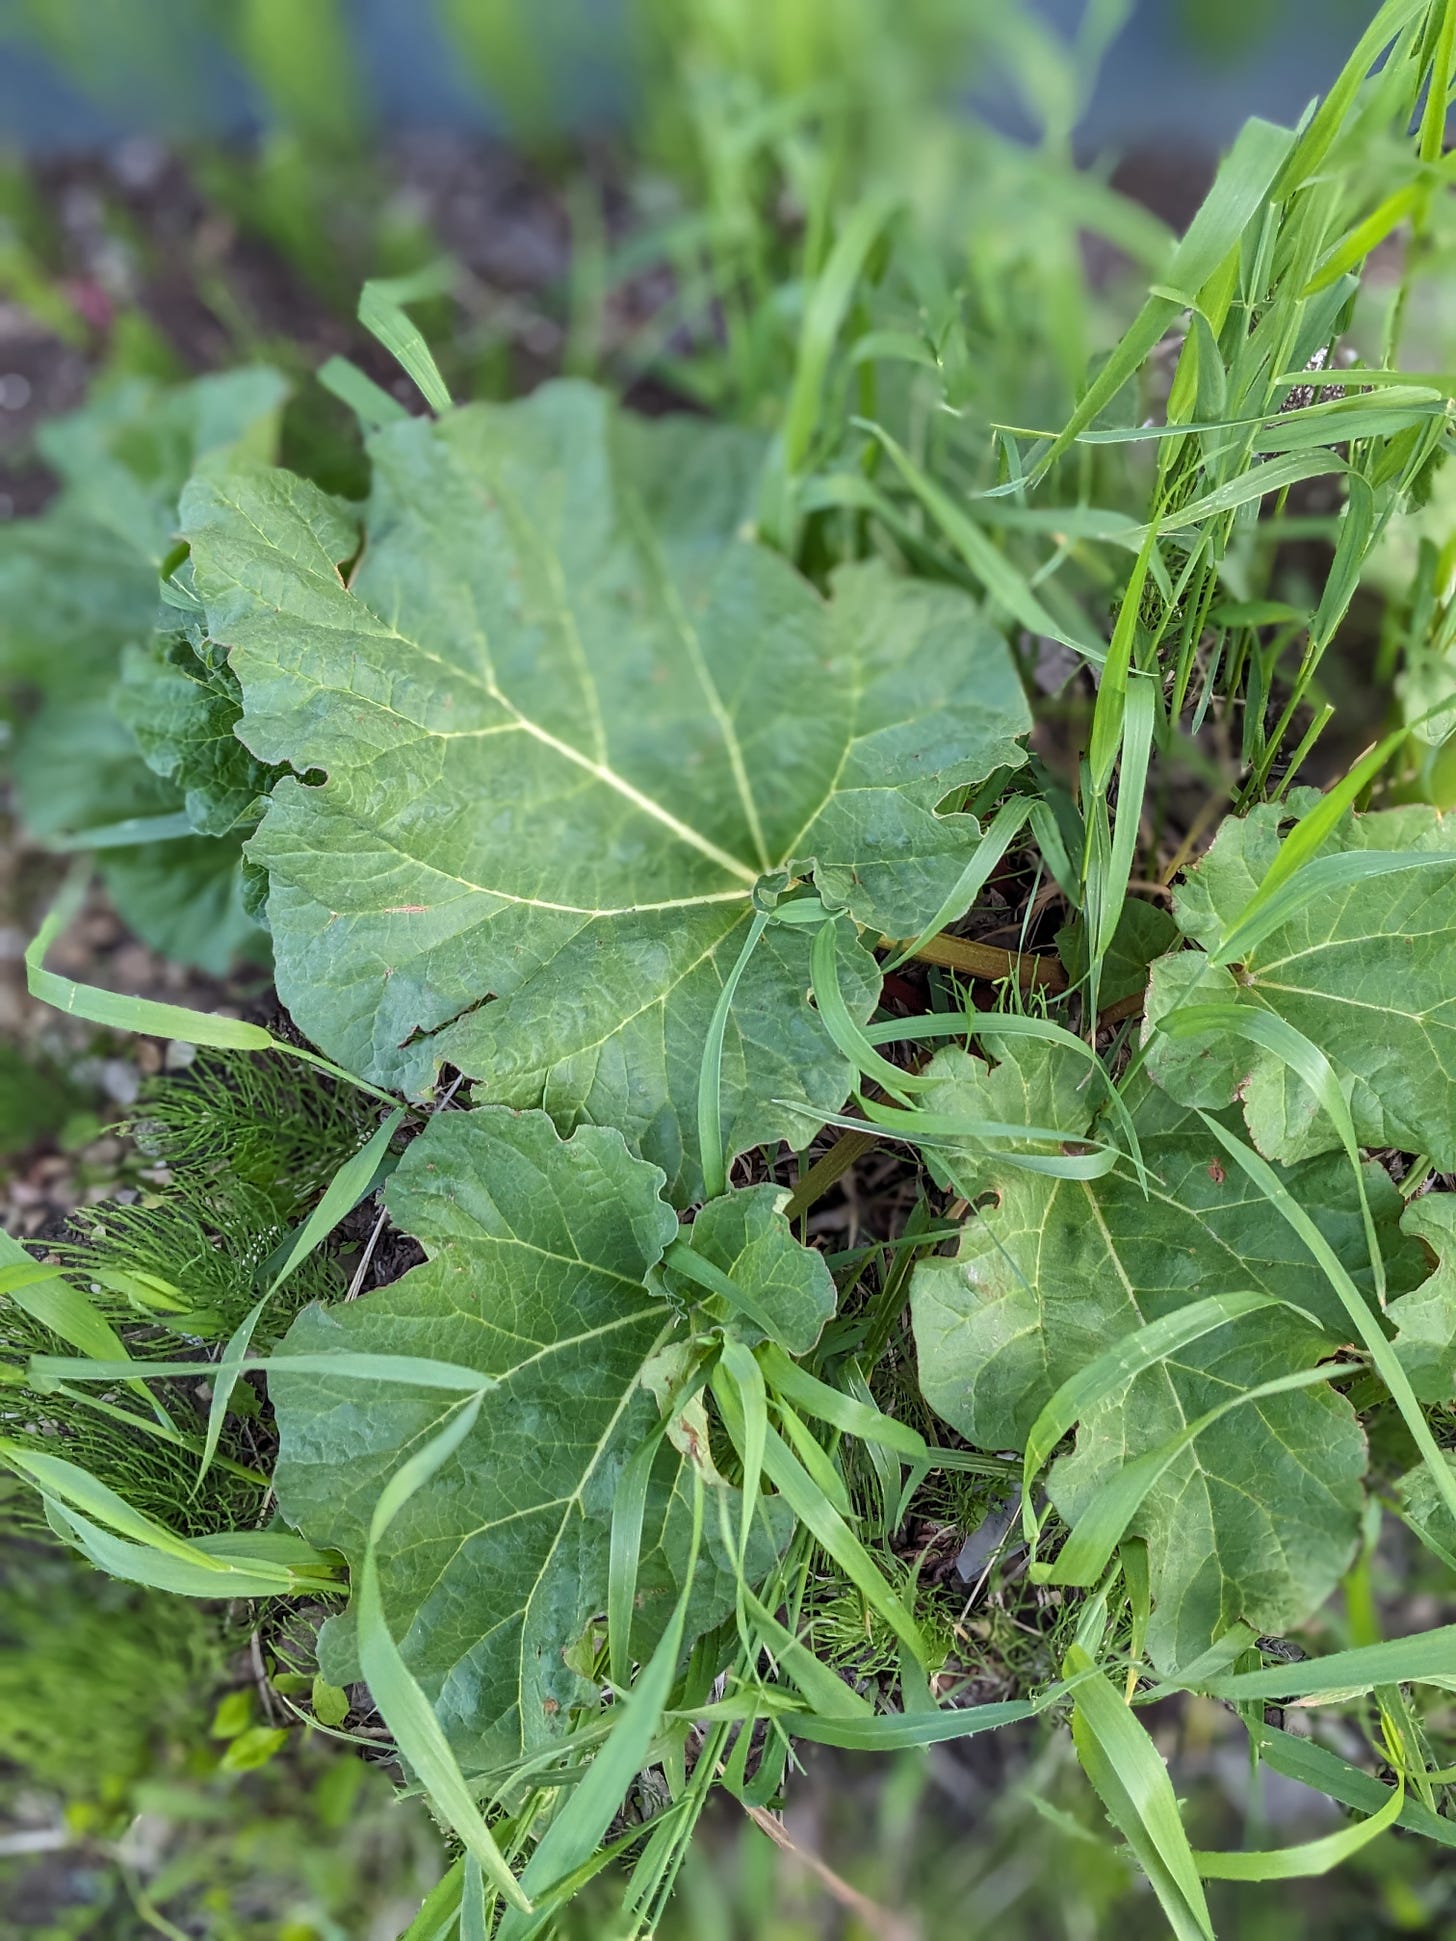 four broad green rhubarb leaves spread out in all directions. many stalks of grass can be seen growing between each leaf